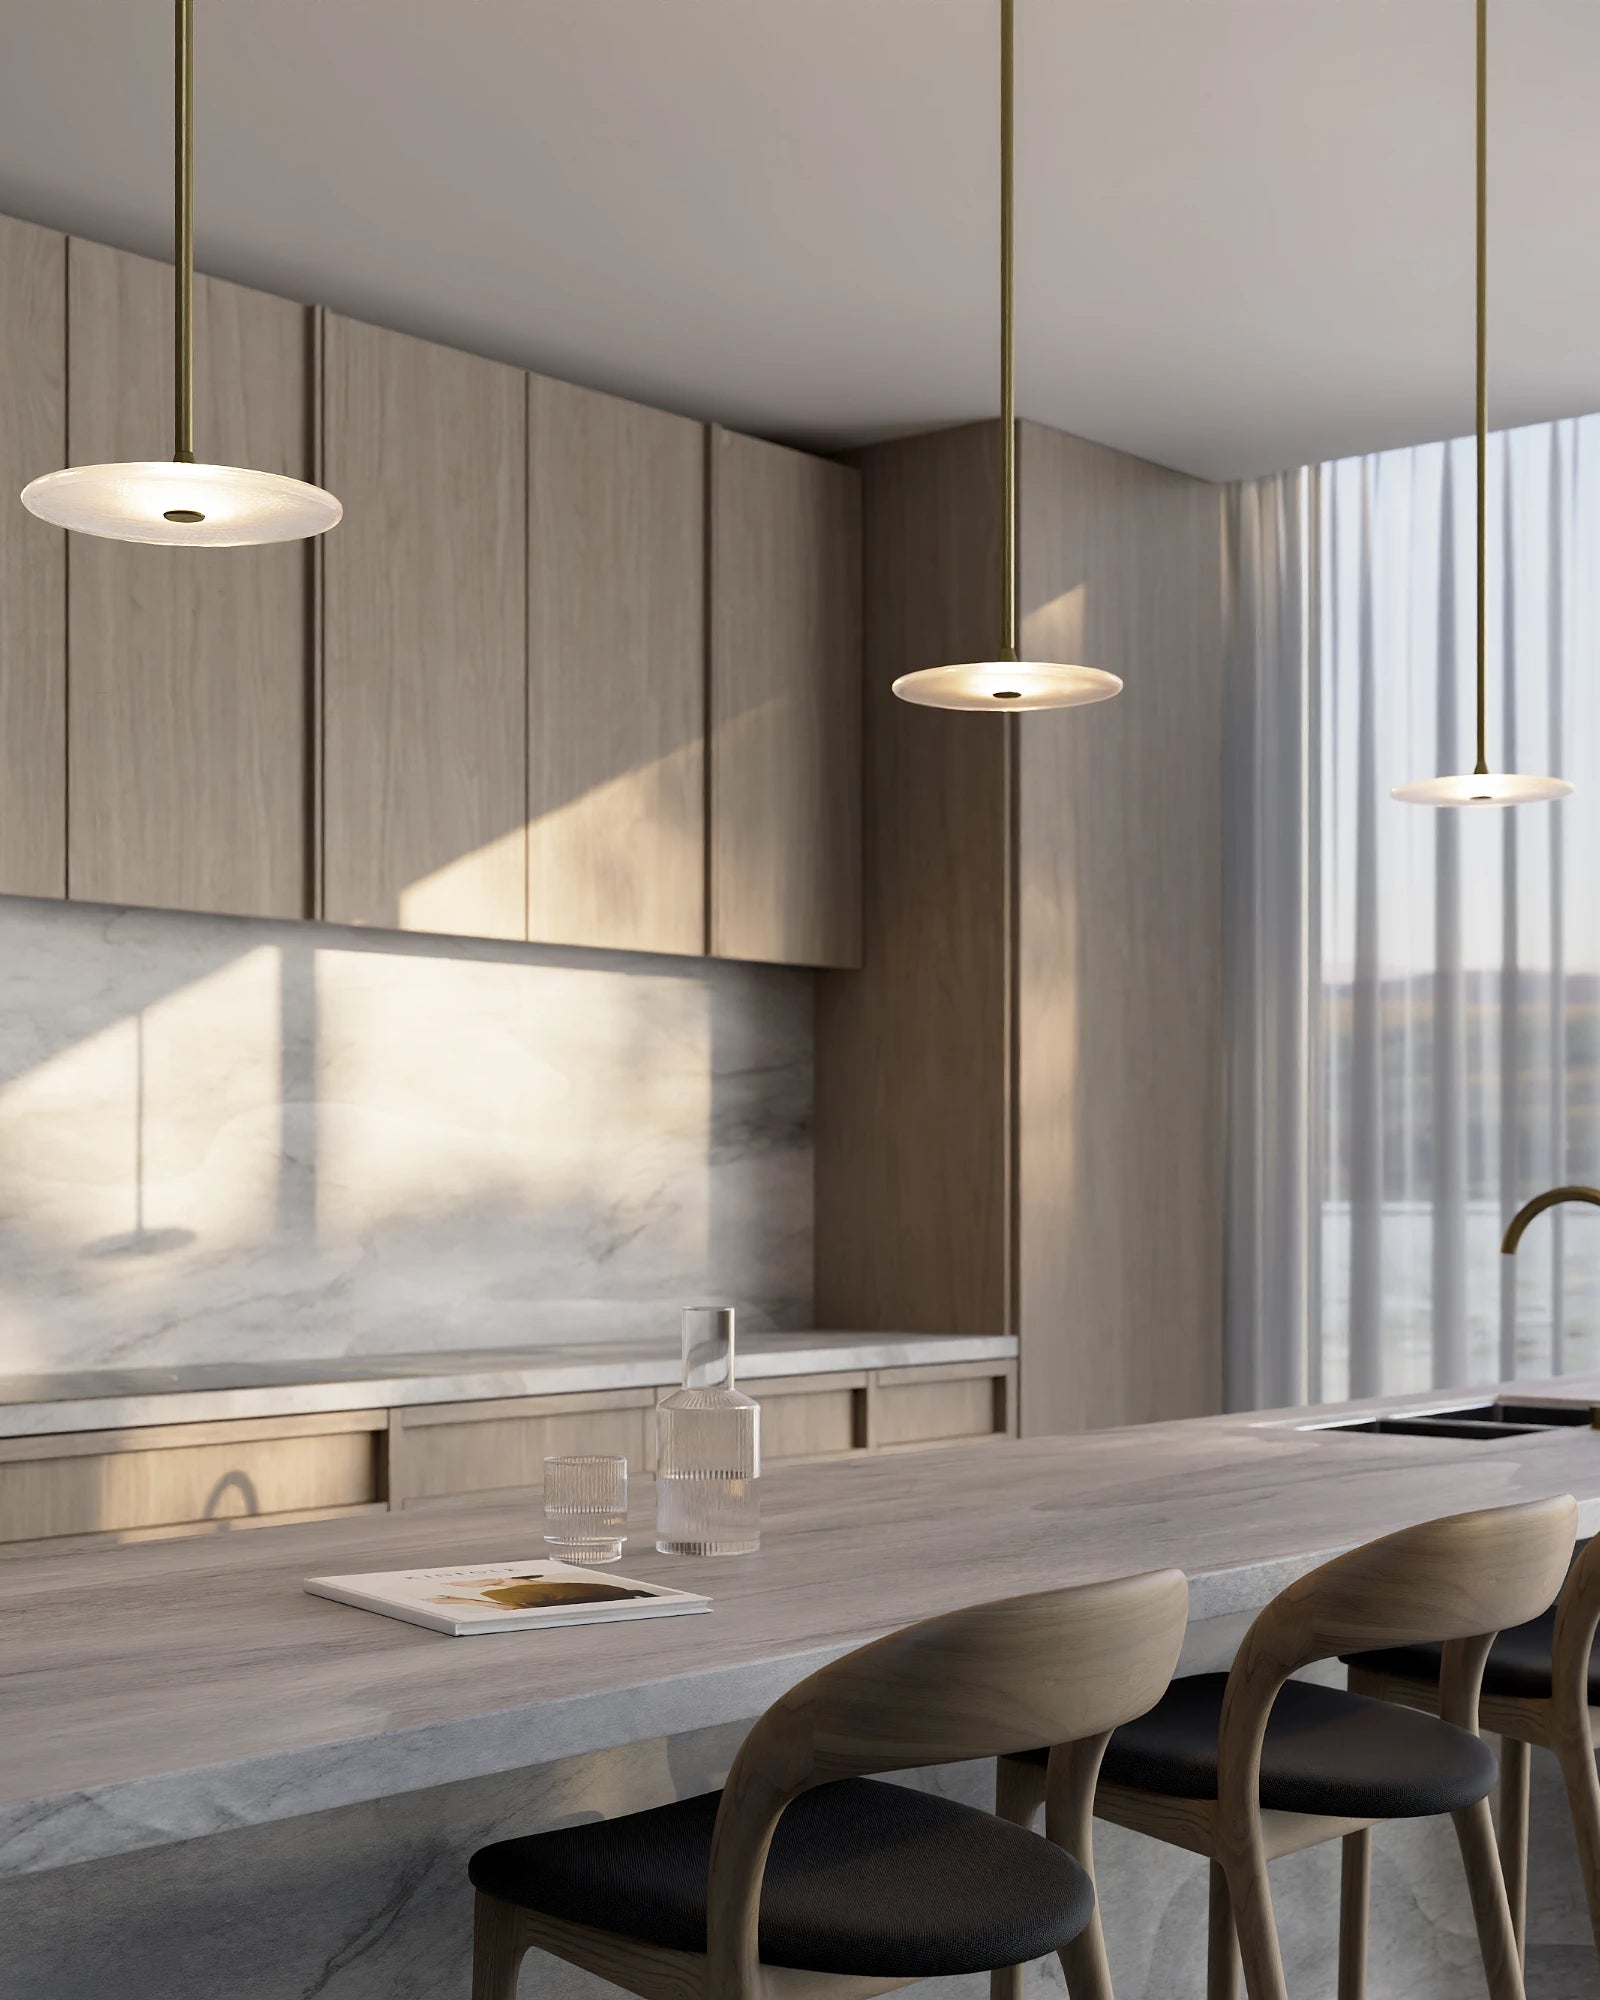 Coral Rod Pendant Light in a contemporary kitchen | Kitchen Lighting Soktas Lighting | Nook Collections